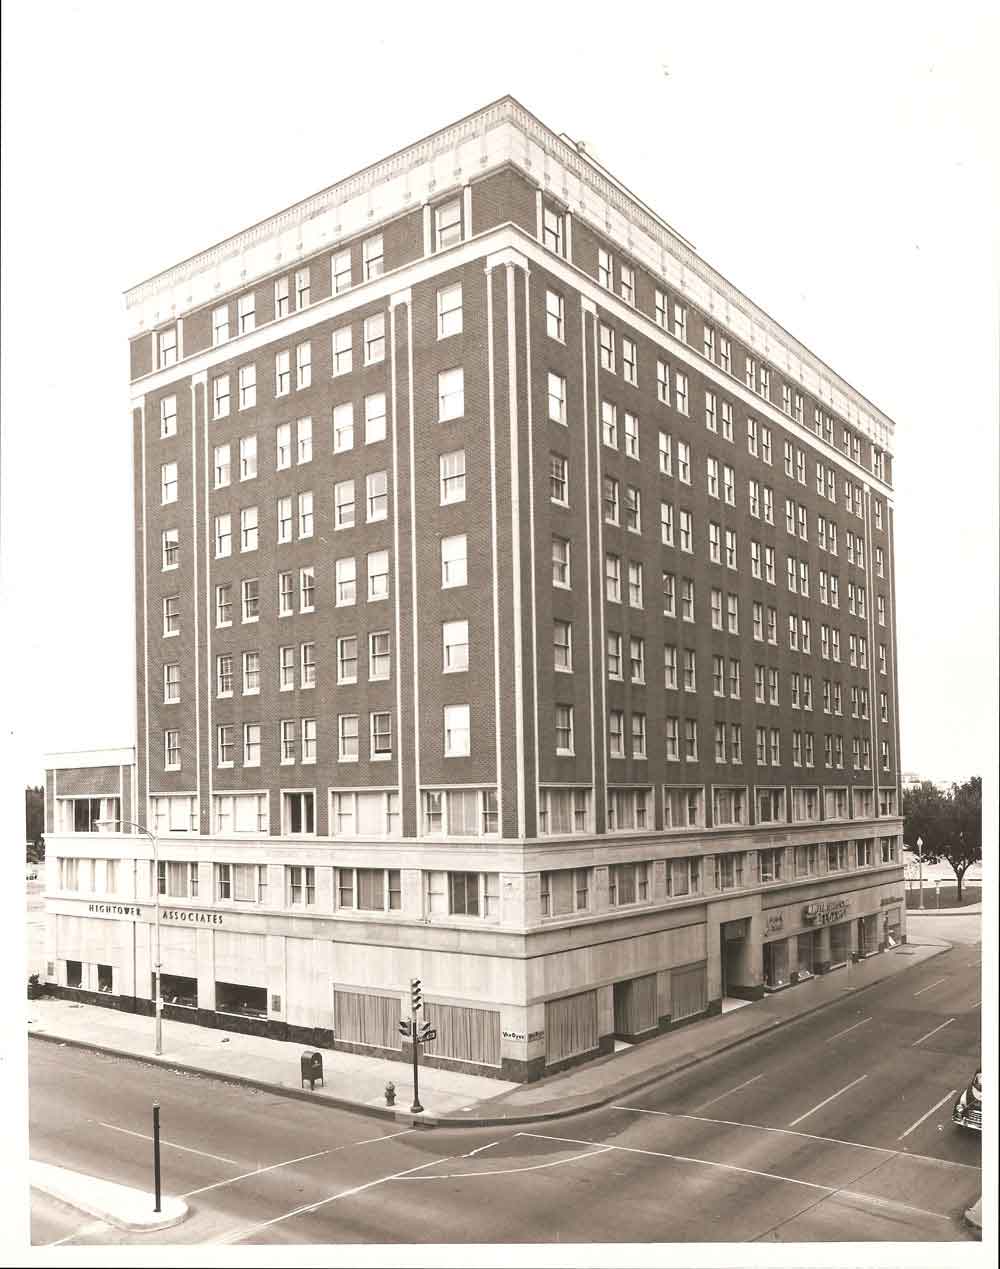 (HTC.2010.1.02) - Hightower Building, 105 N Hudson, View Northwest from Mercantile Building, c. 1940s